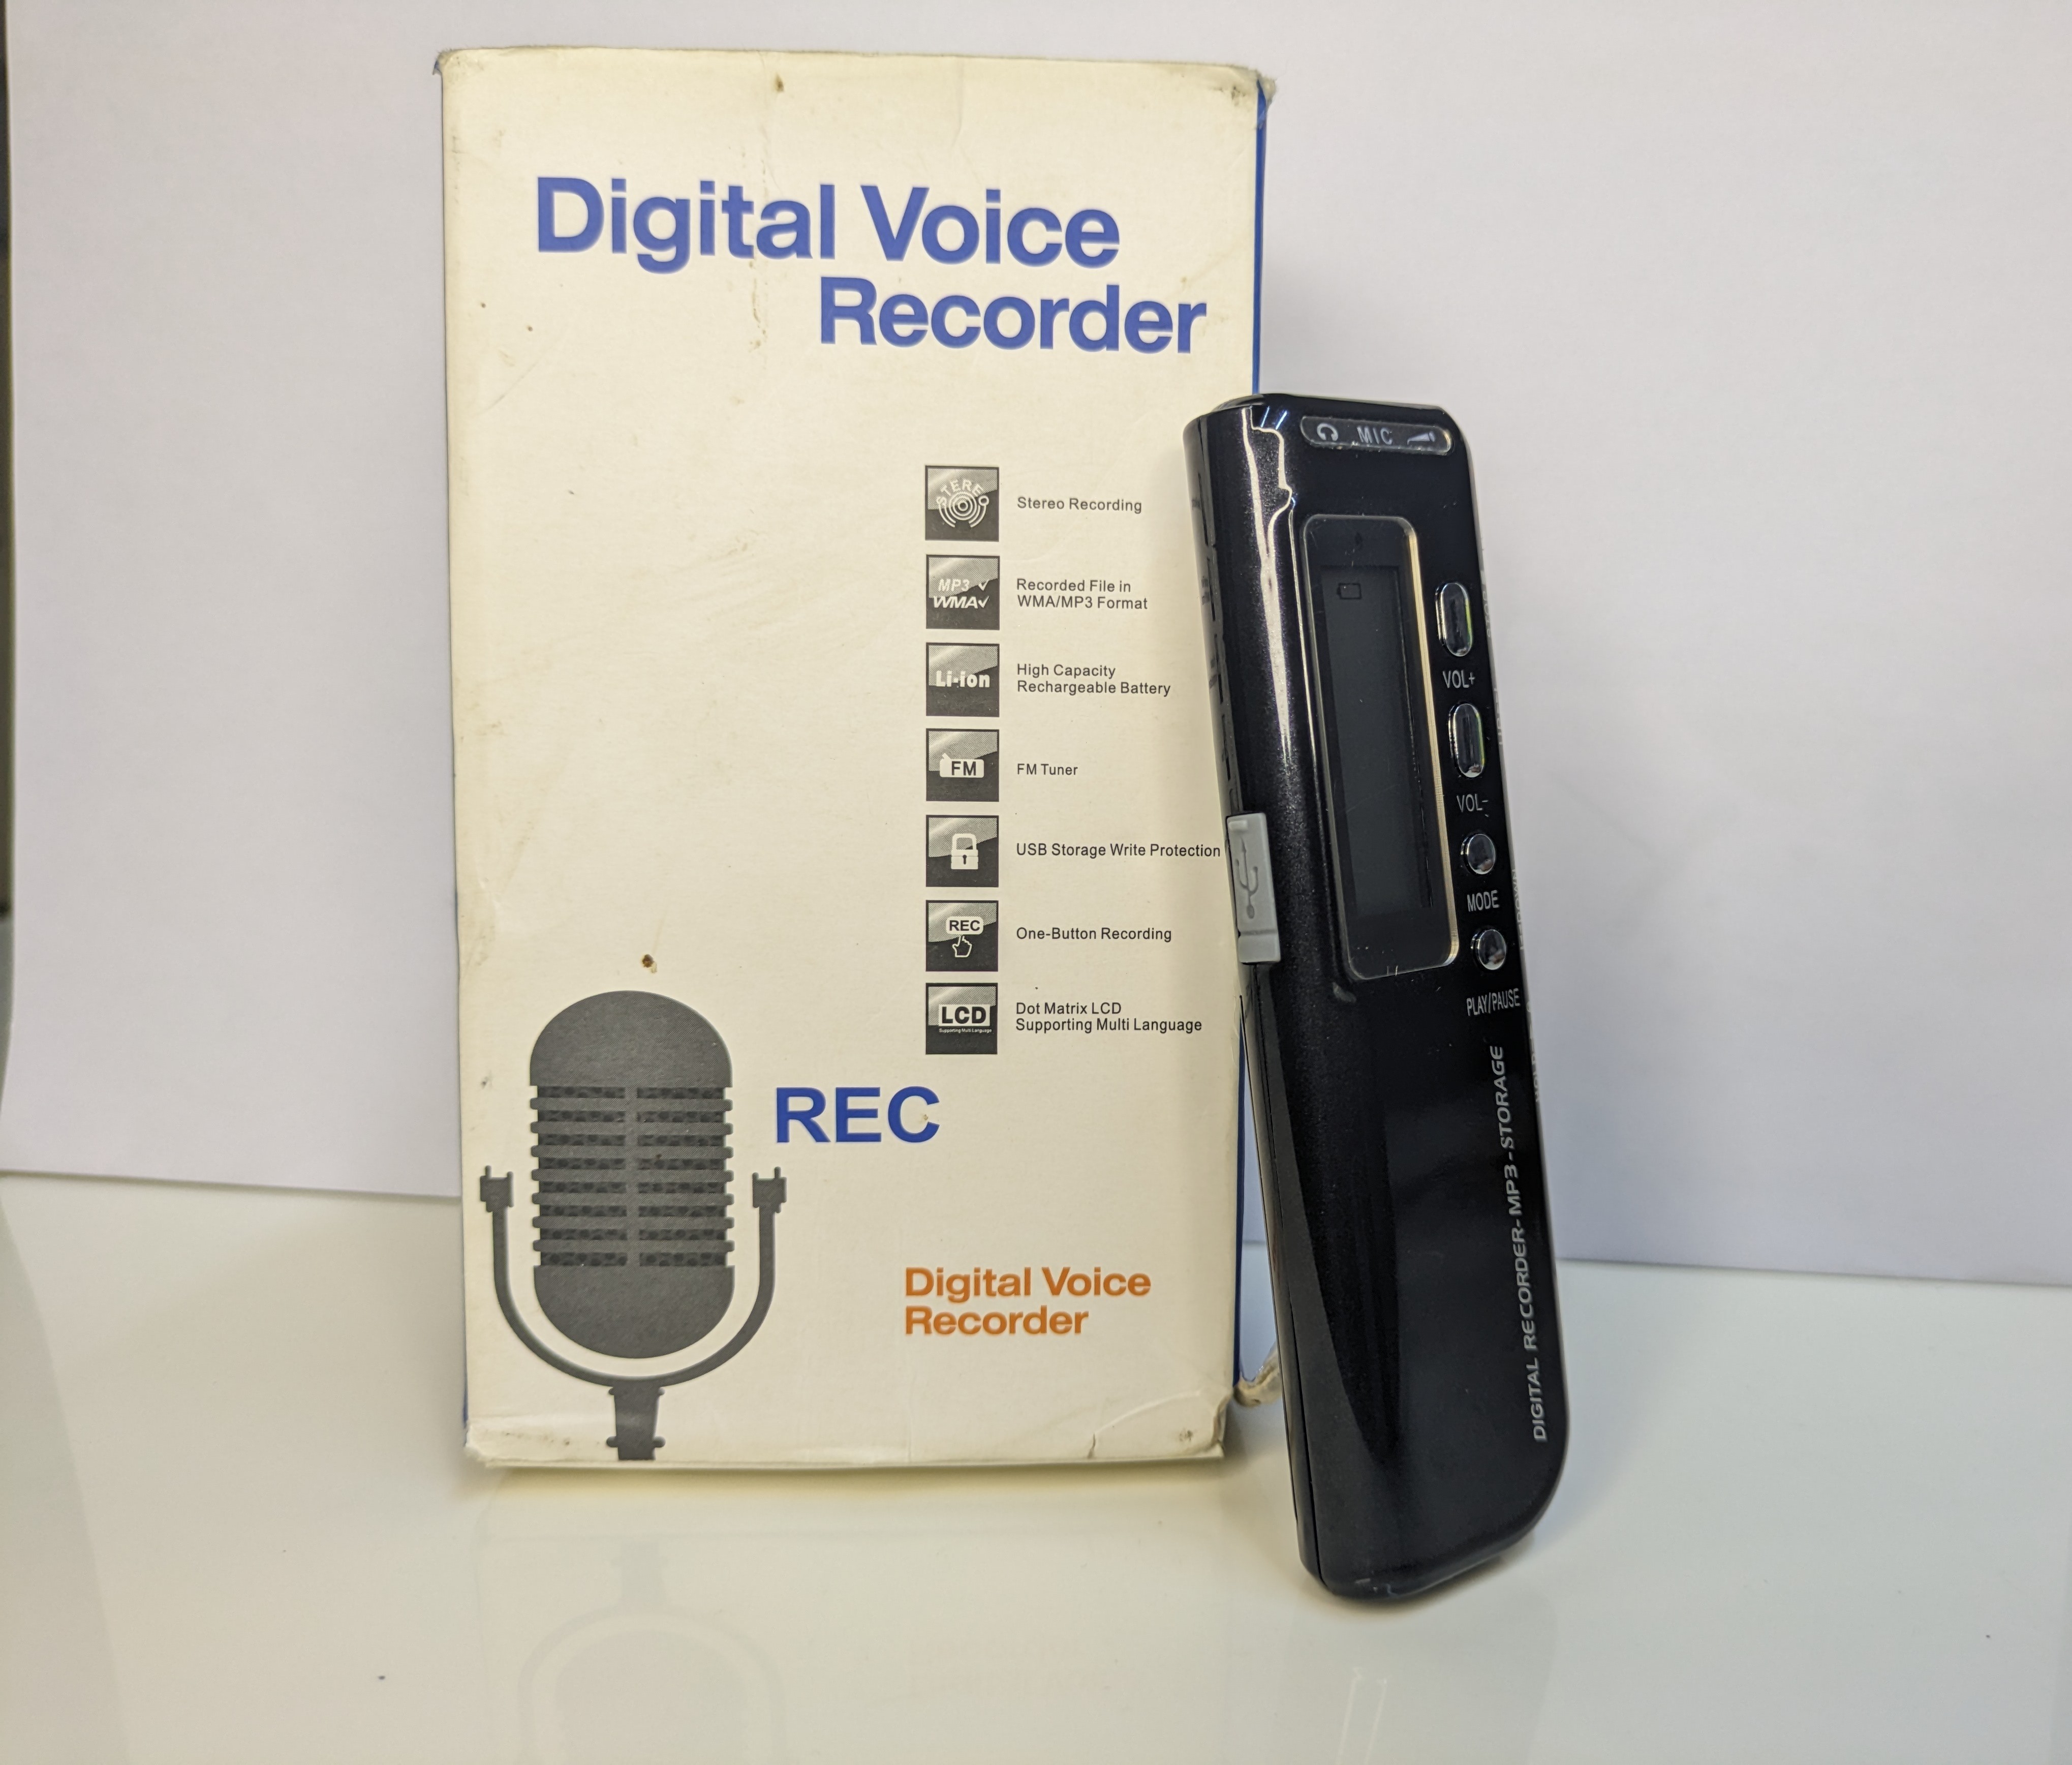 Sleek digital voice recorder with compact design, featuring intuitive buttons and screen for easy use.